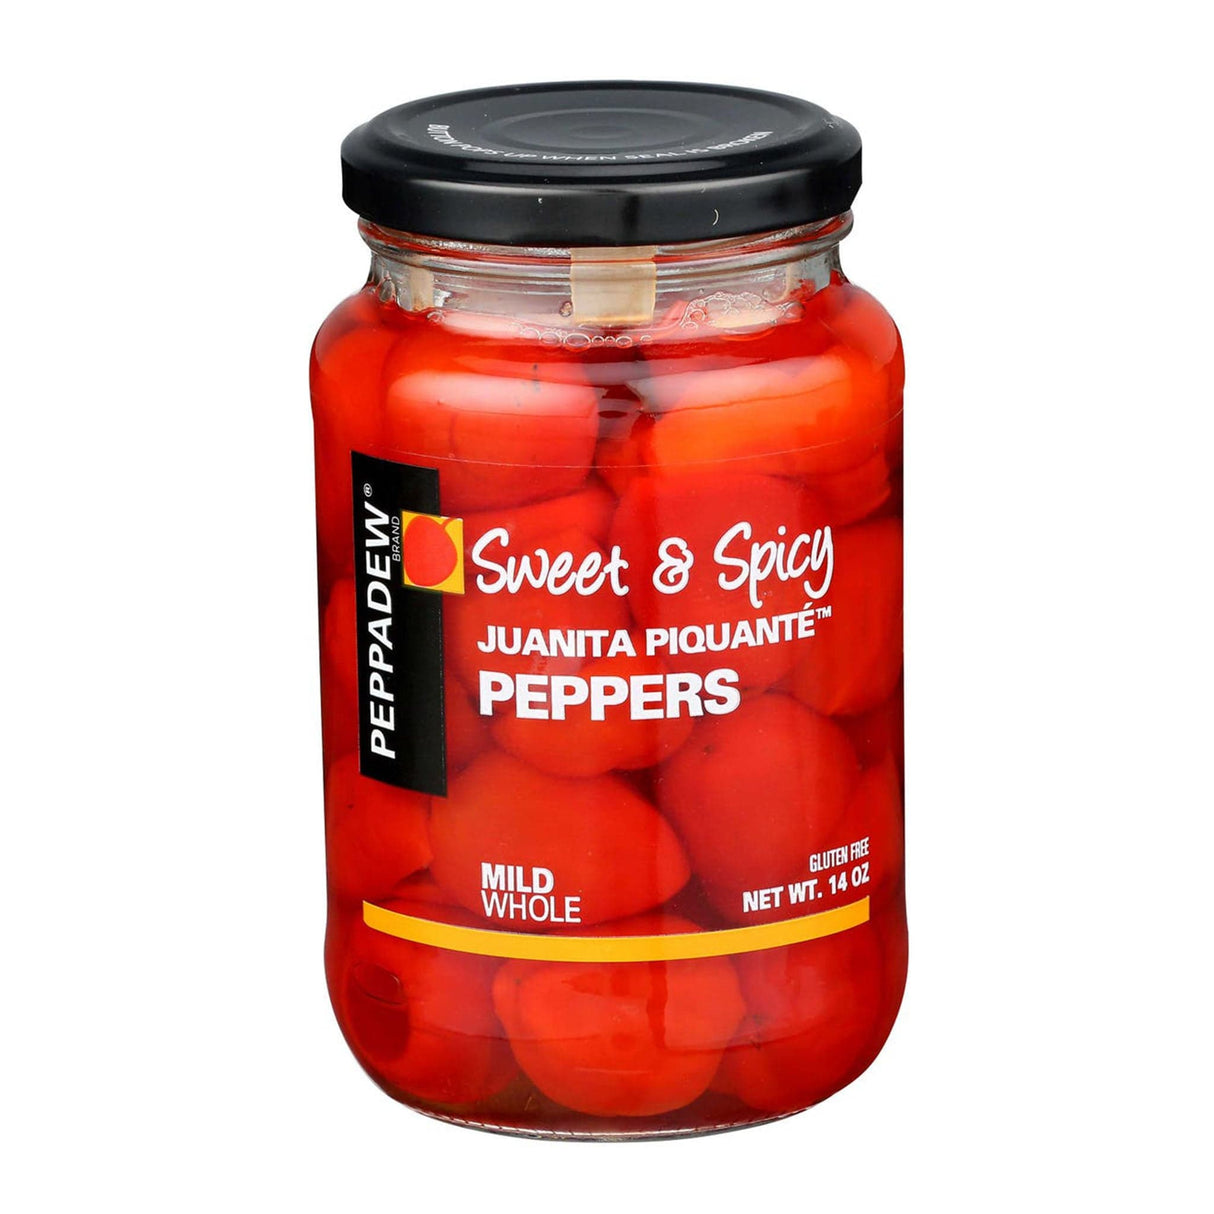 Peppadew Mild Whole Piquante Peppers (Sweet & Spicy)